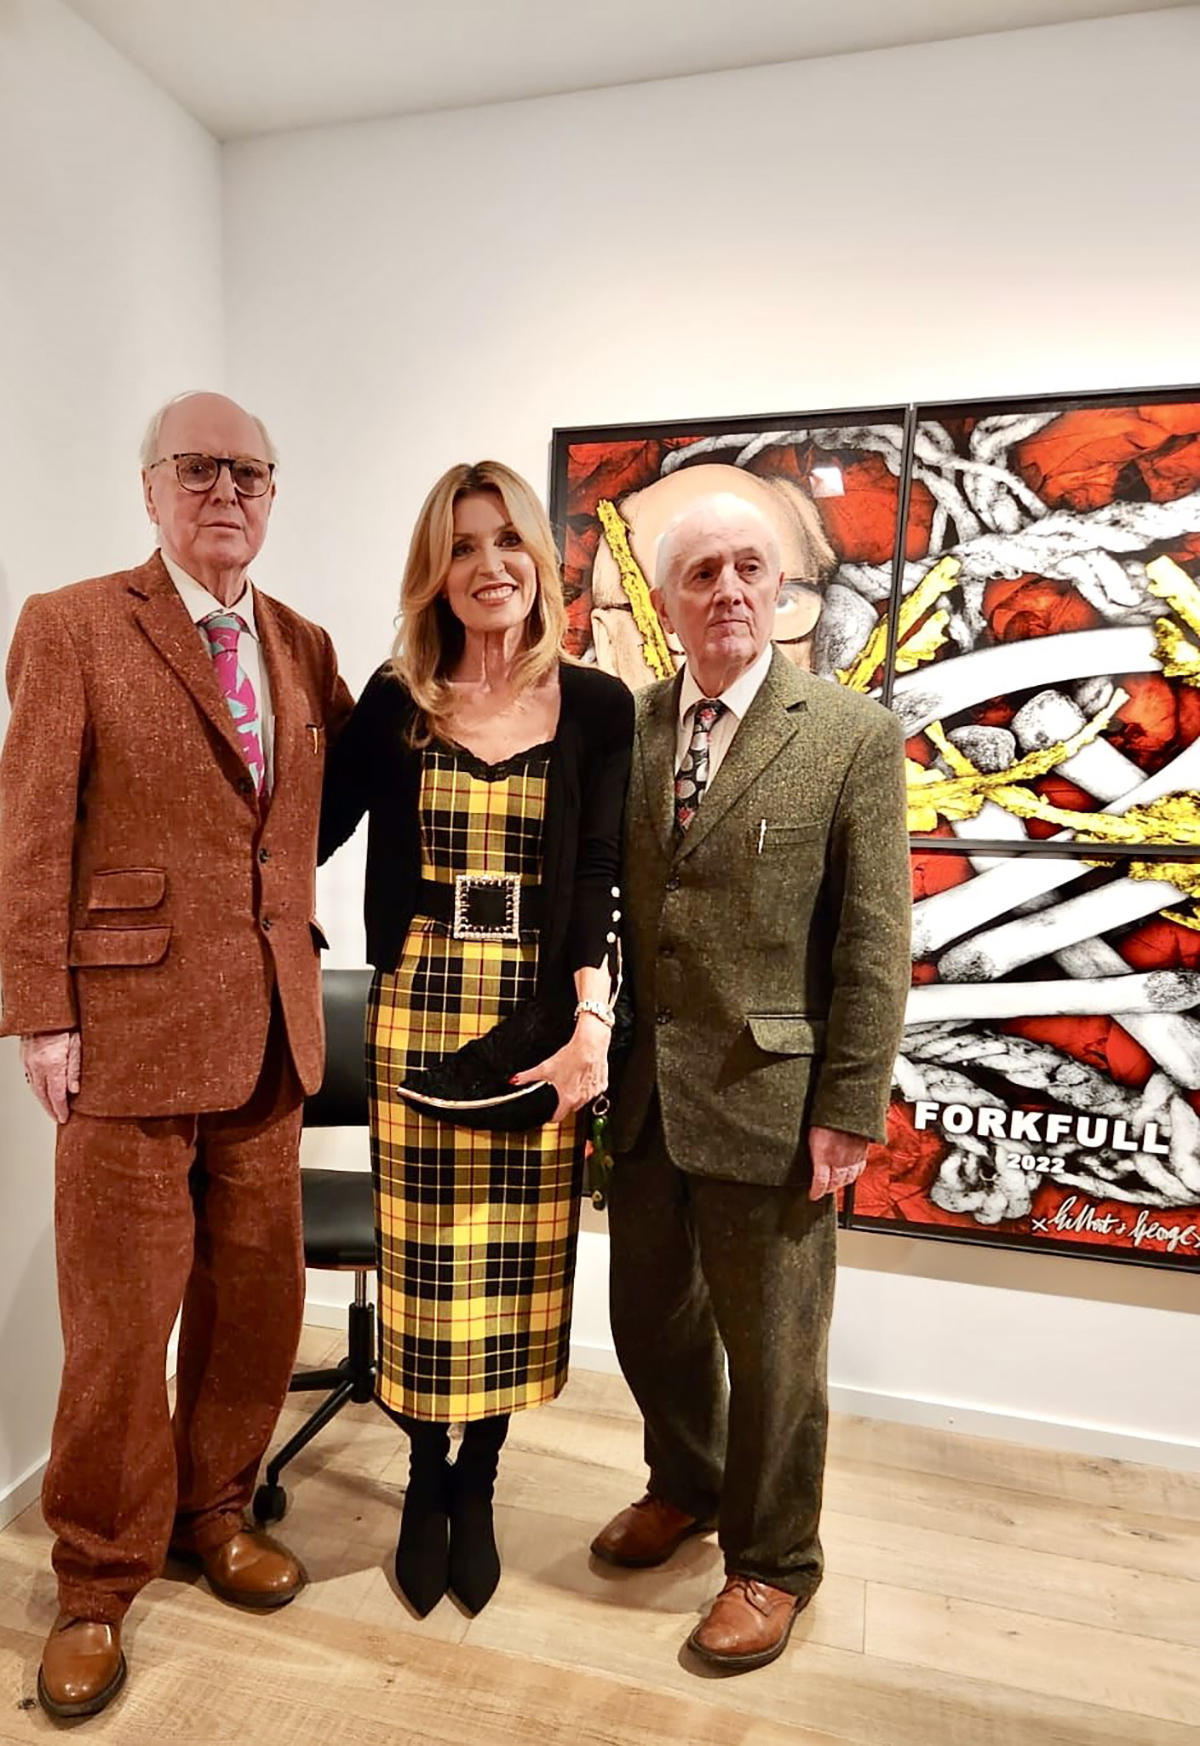 A woman wearing a black and yellow dress standing between two old men